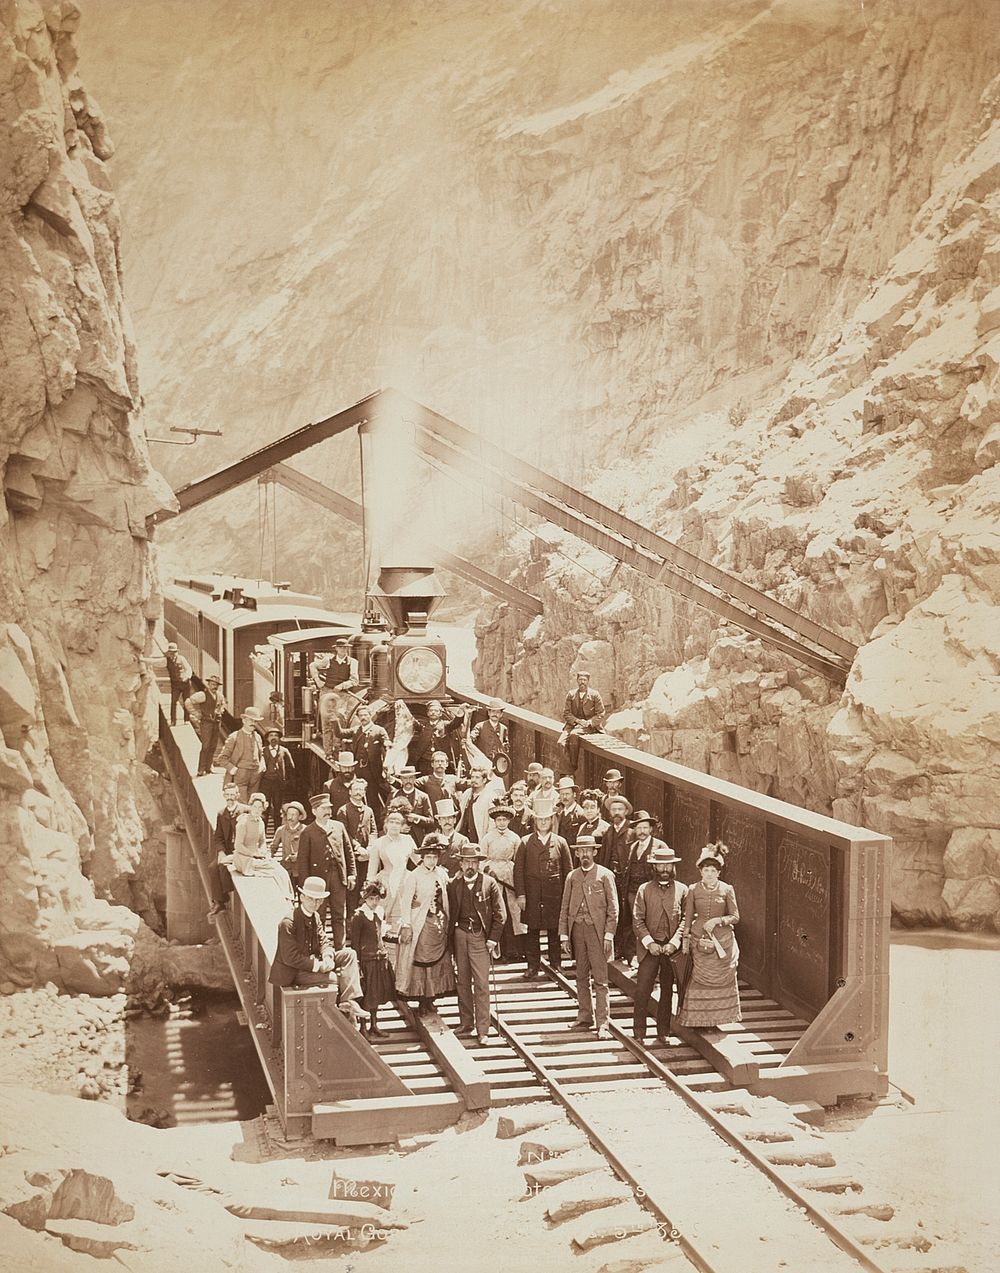 Royal Gorge by William Henry Jackson